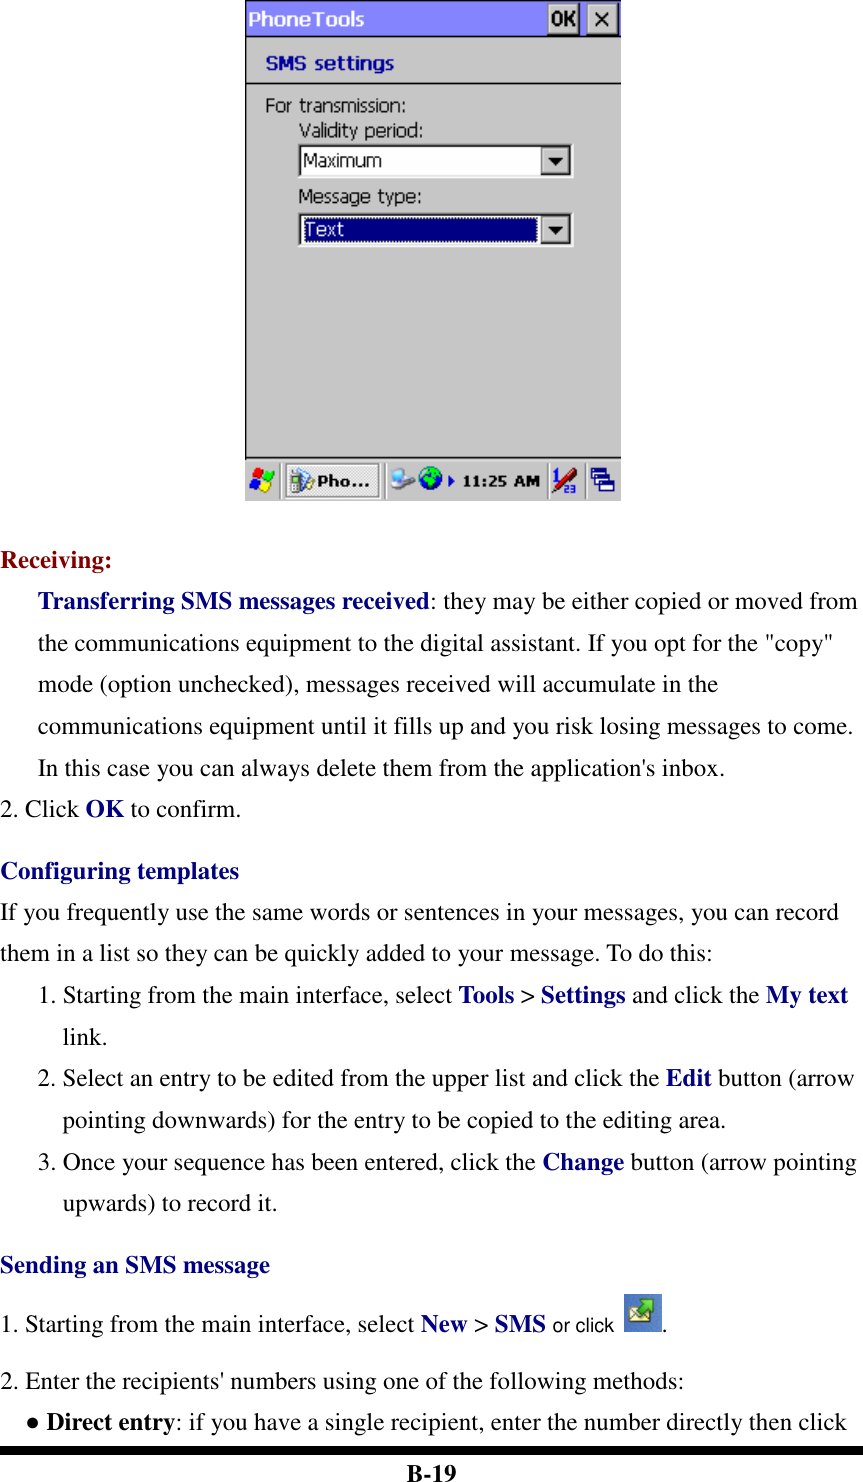  B-19   Receiving: Transferring SMS messages received: they may be either copied or moved from the communications equipment to the digital assistant. If you opt for the &quot;copy&quot; mode (option unchecked), messages received will accumulate in the communications equipment until it fills up and you risk losing messages to come. In this case you can always delete them from the application&apos;s inbox. 2. Click OK to confirm.    Configuring templates If you frequently use the same words or sentences in your messages, you can record them in a list so they can be quickly added to your message. To do this: 1. Starting from the main interface, select Tools &gt; Settings and click the My text link. 2. Select an entry to be edited from the upper list and click the Edit button (arrow pointing downwards) for the entry to be copied to the editing area.   3. Once your sequence has been entered, click the Change button (arrow pointing upwards) to record it.  Sending an SMS message 1. Starting from the main interface, select New &gt; SMS or click . 2. Enter the recipients&apos; numbers using one of the following methods:   ● Direct entry: if you have a single recipient, enter the number directly then click 